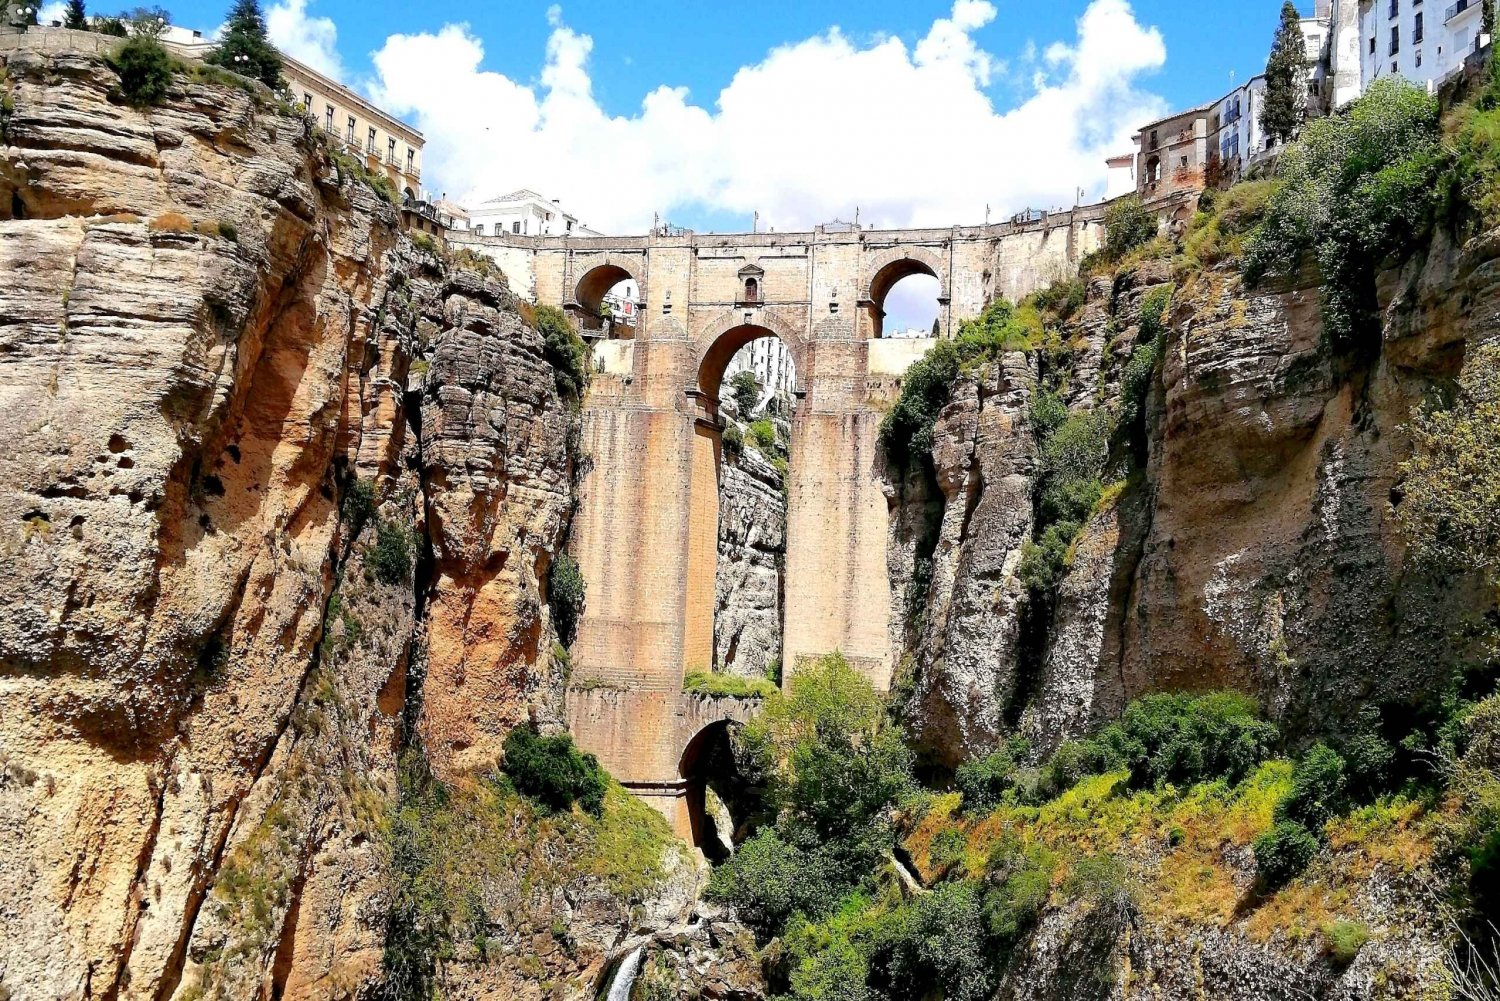 From Costa del Sol: Ronda, and Bullring Tour